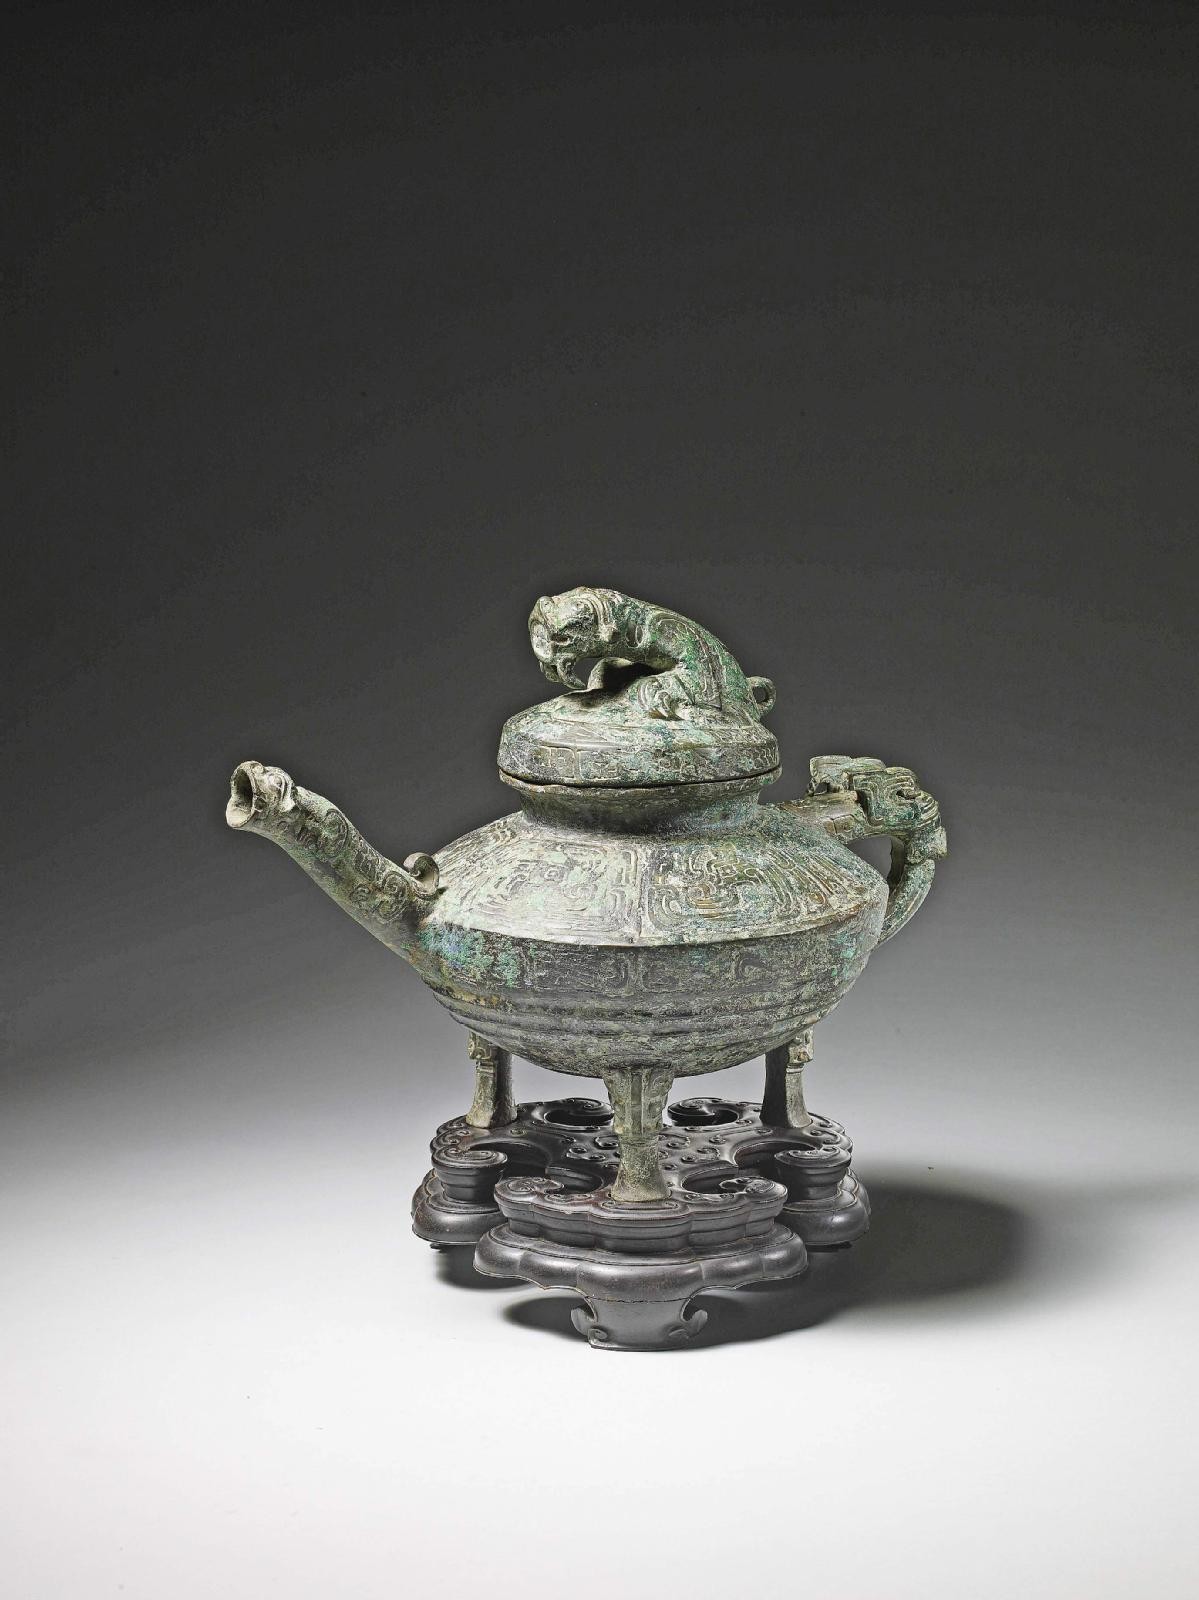 The bronze vessel is up for auction in Britain. Photo: The Canterbury Auction Galleries